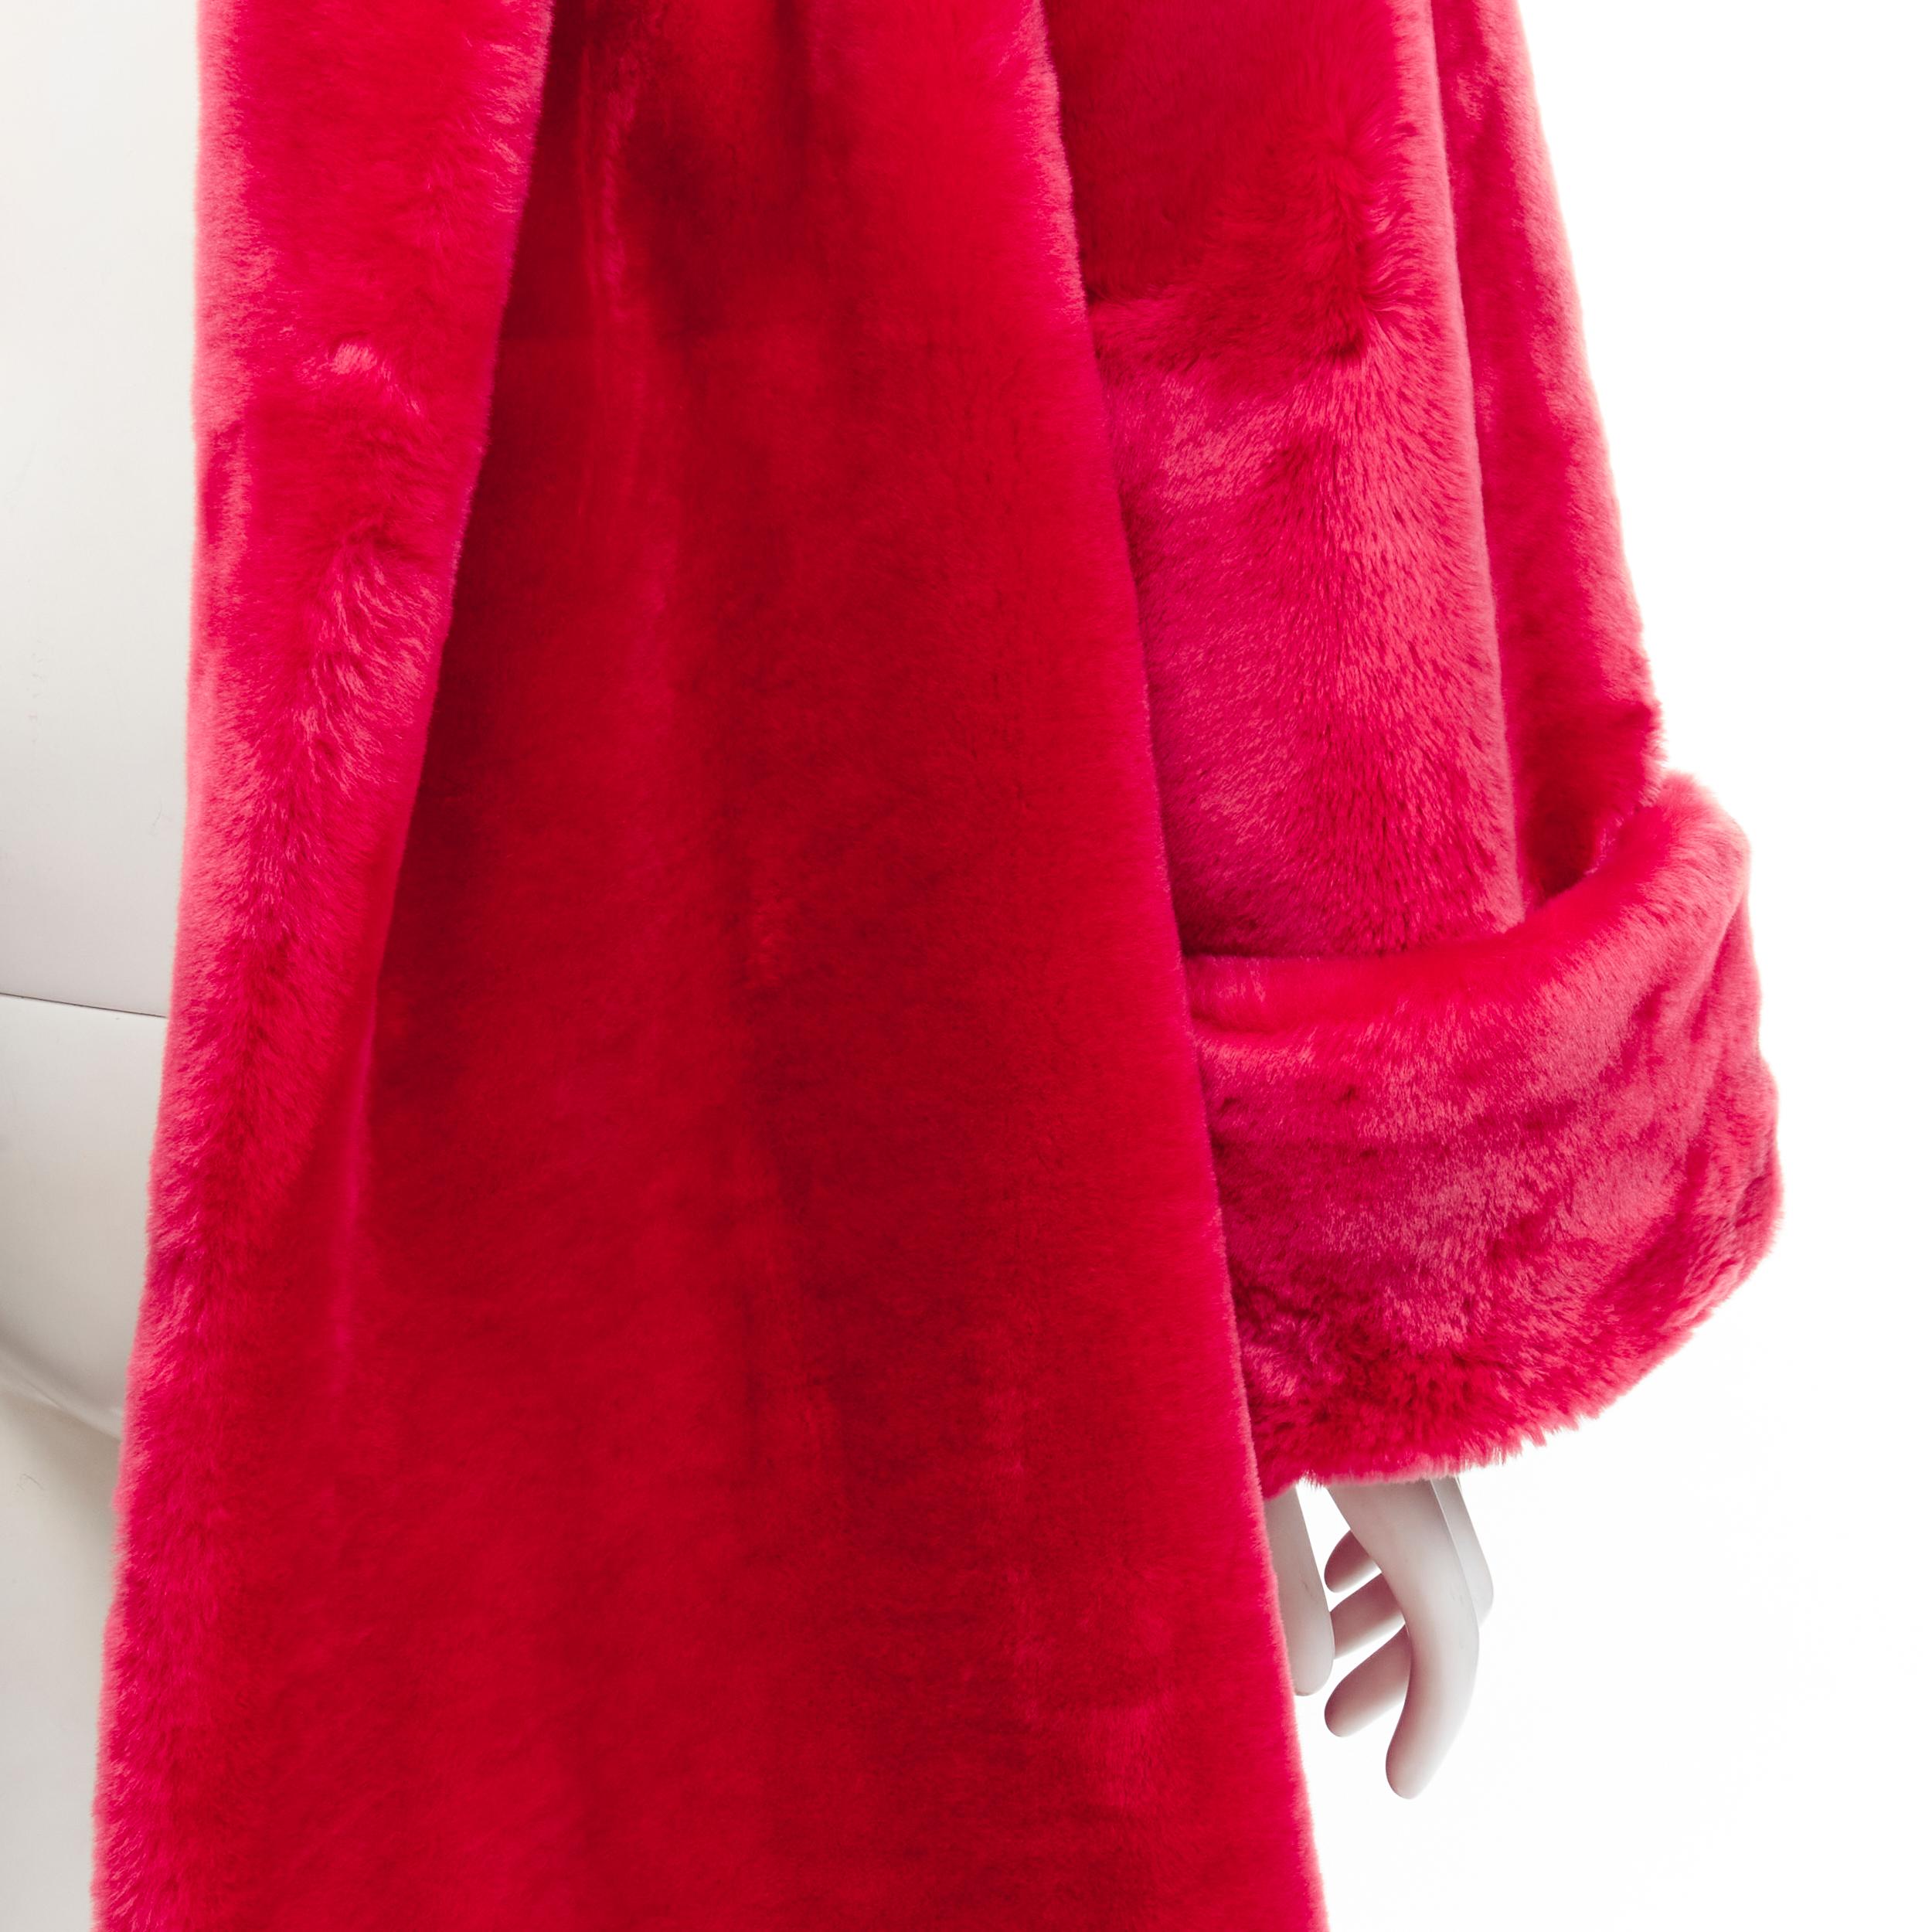 CHRISTIAN DIOR BOUTIQUE FOURRURE Vintage red faux fur swing mouton court coat
Reference: TGAS/C01682
Brand: Christian Dior
Collection: Fourrure
Material: Feels like polyester
Color: Red
Pattern: Solid
Lining: Fabric
Extra Details: Cuffed